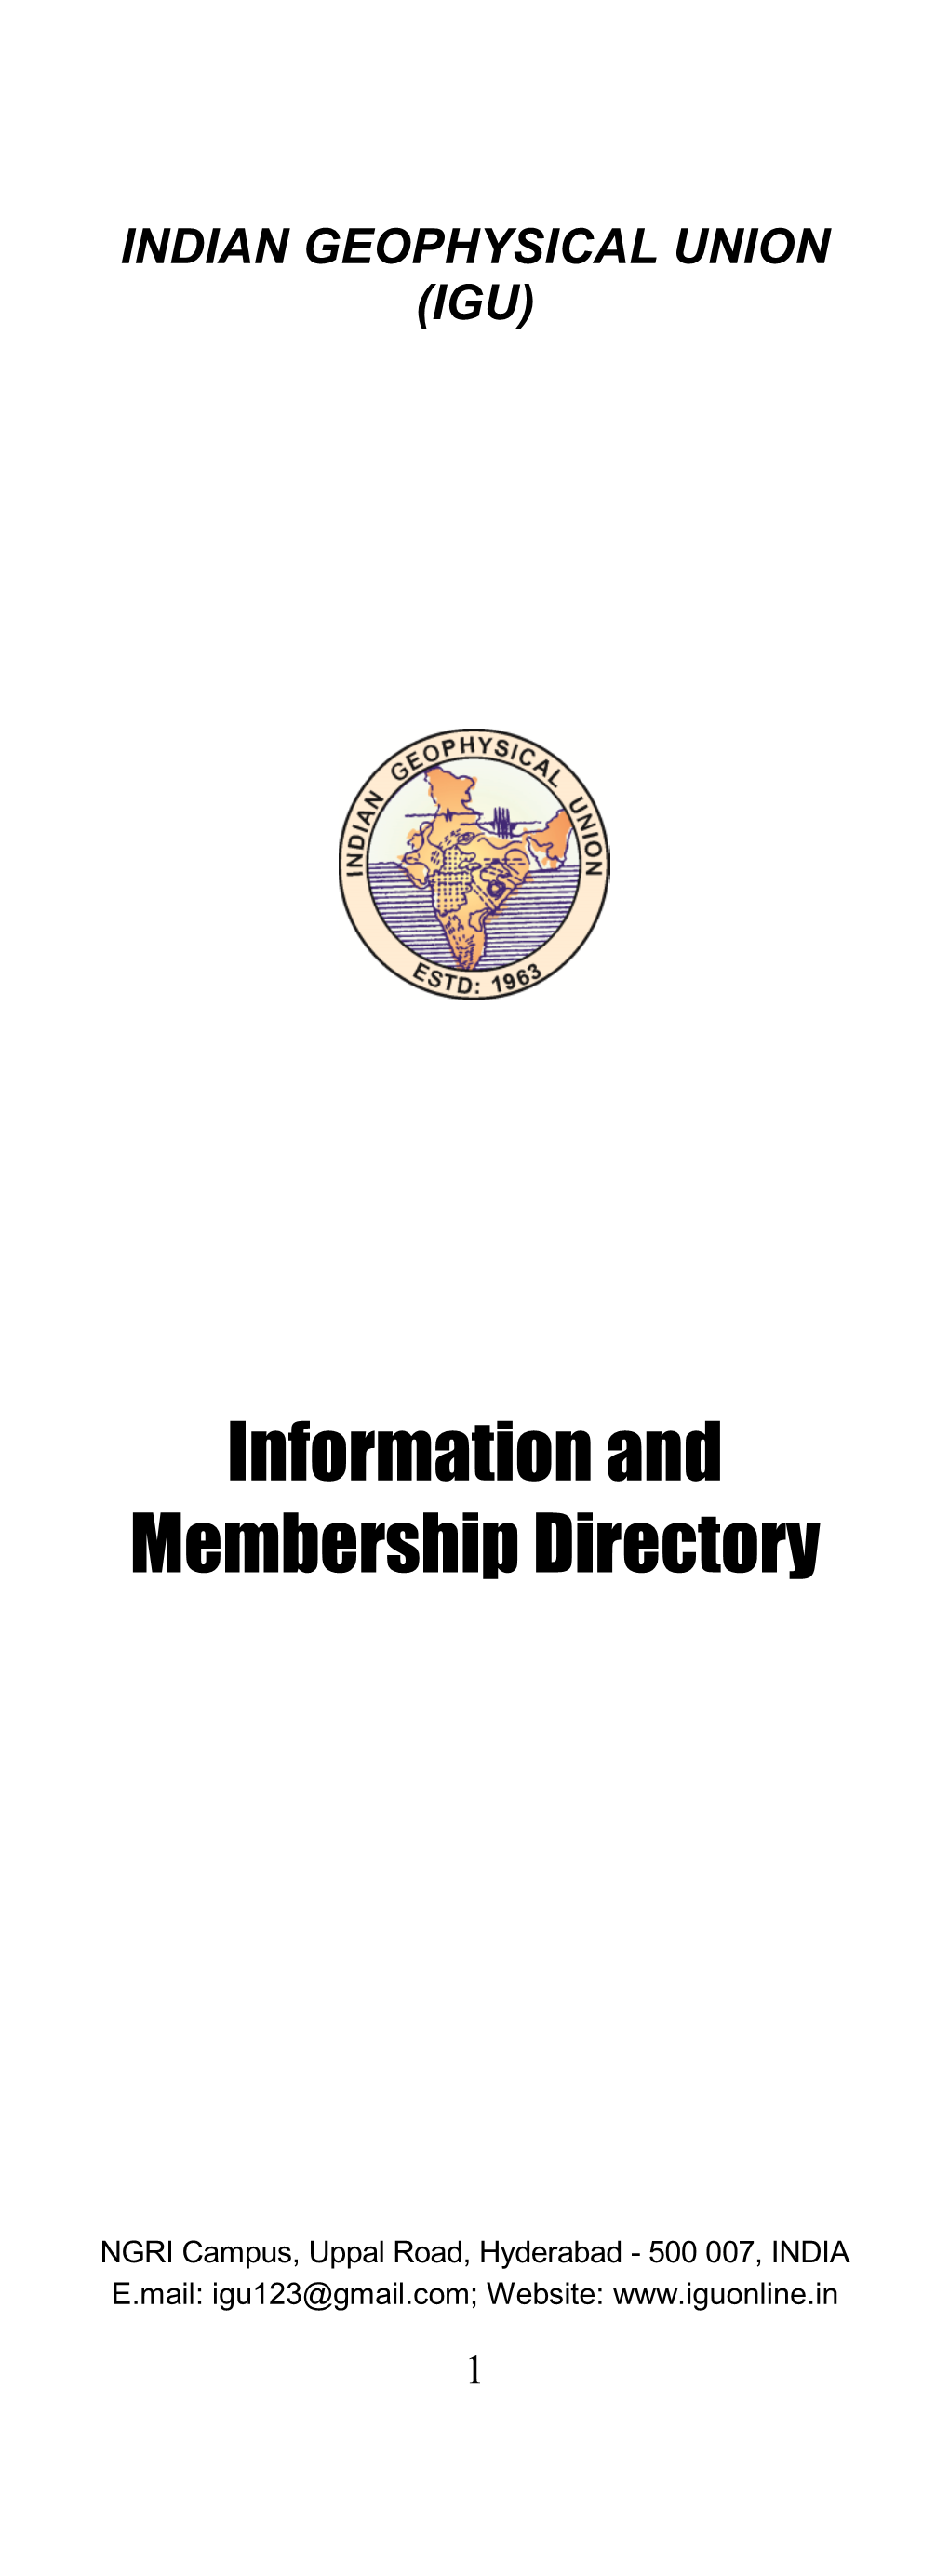 Information and Membership Directory